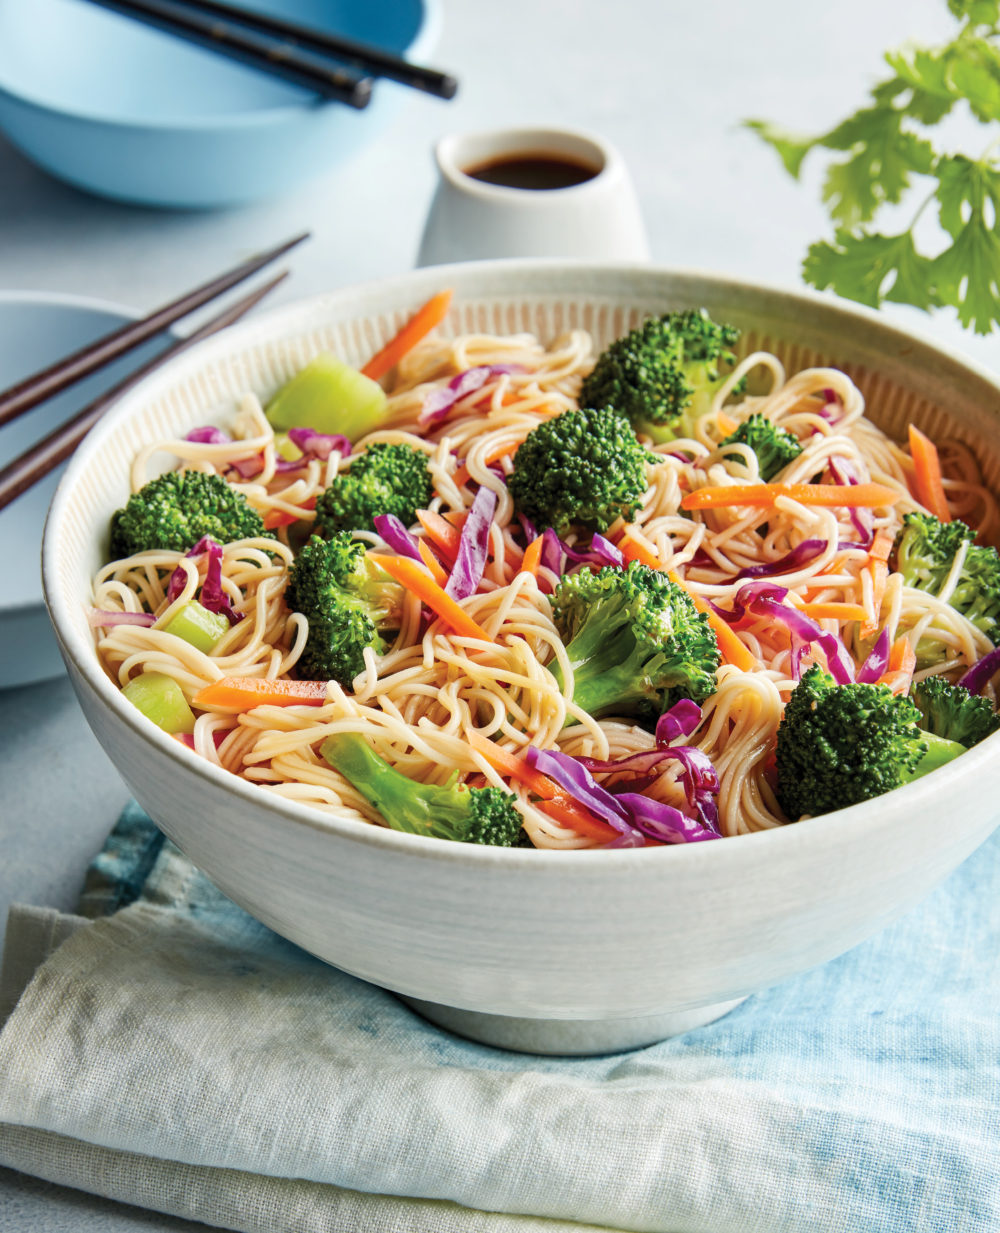 A white bowl has noodles with broccoli, red cabbage and other vegetables in it.